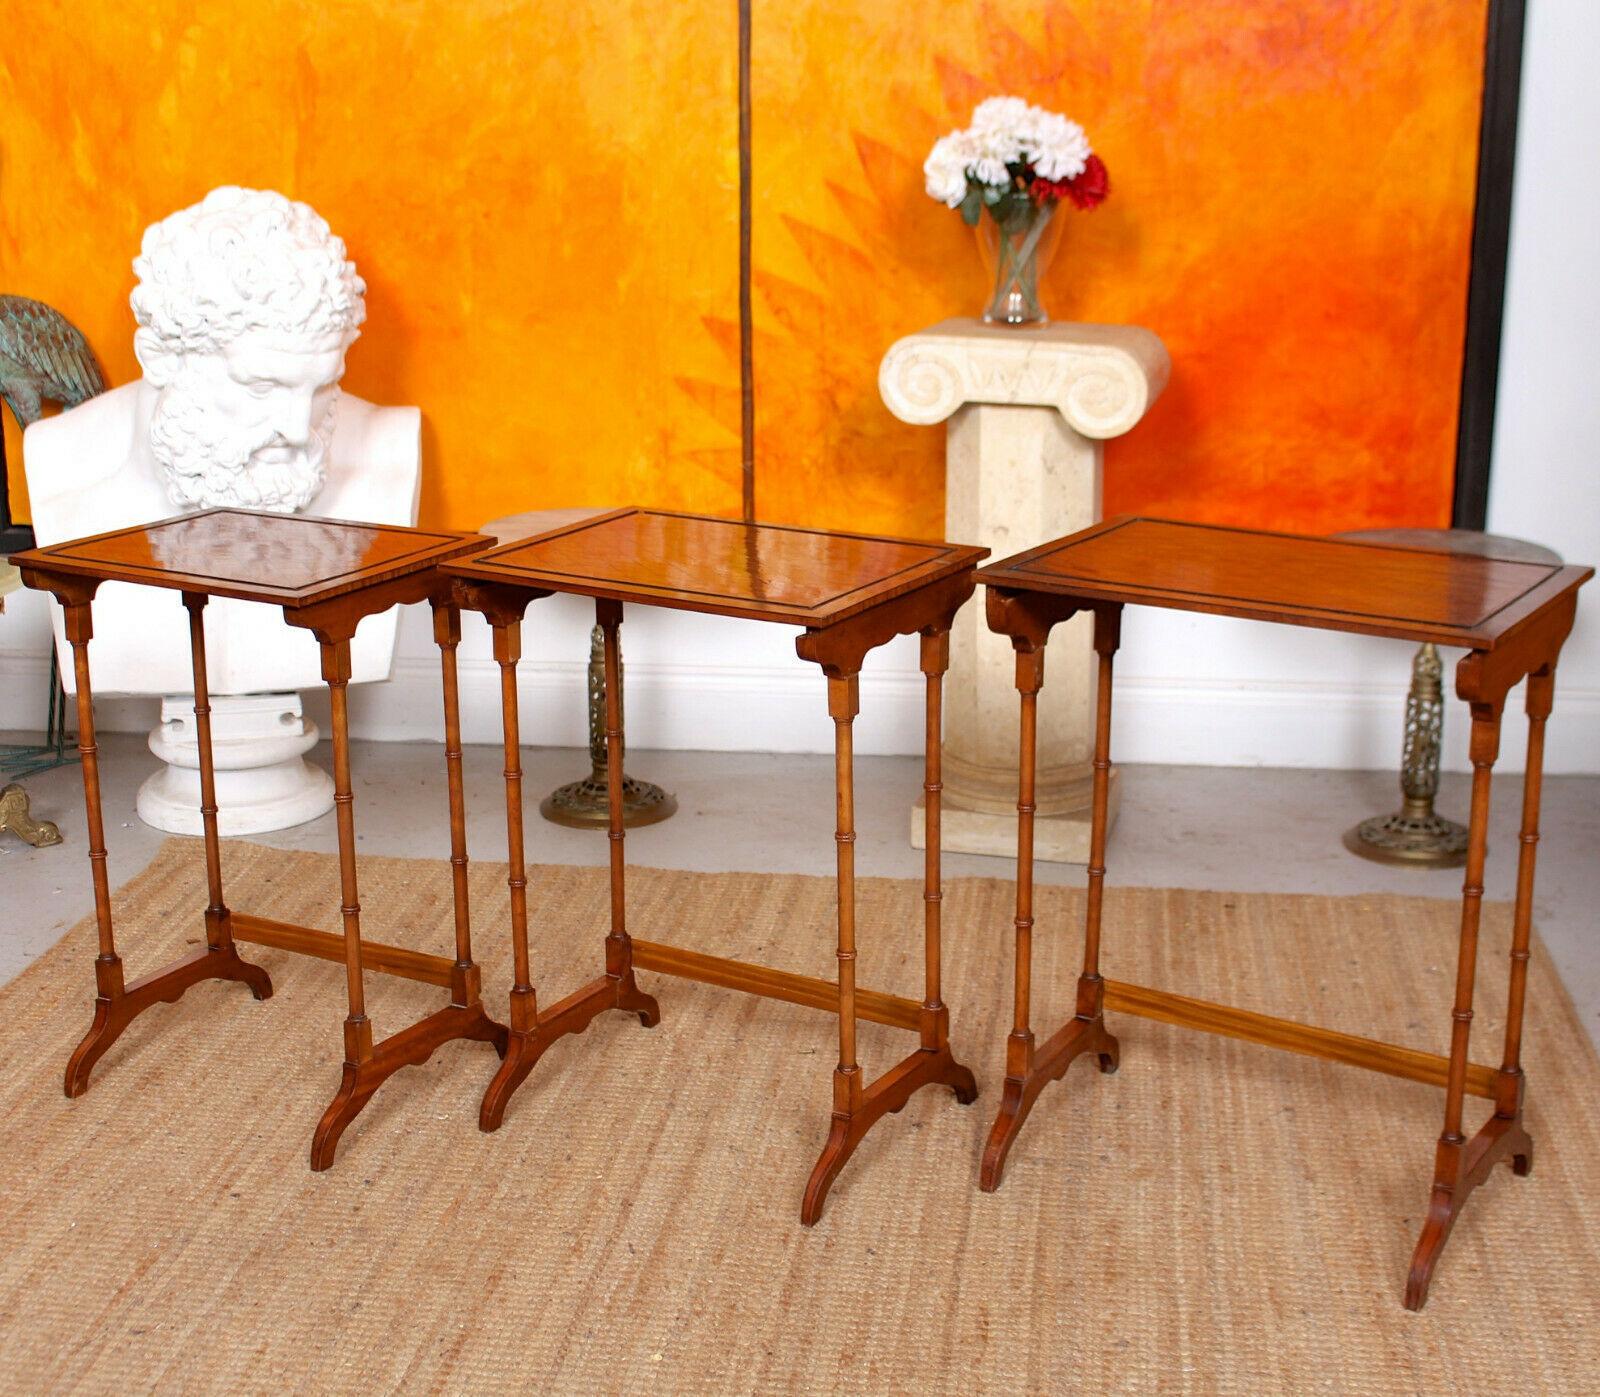 English Nest of Tables Satinwood Crossbanded 3 Side Tables Tall Georgian For Sale 3